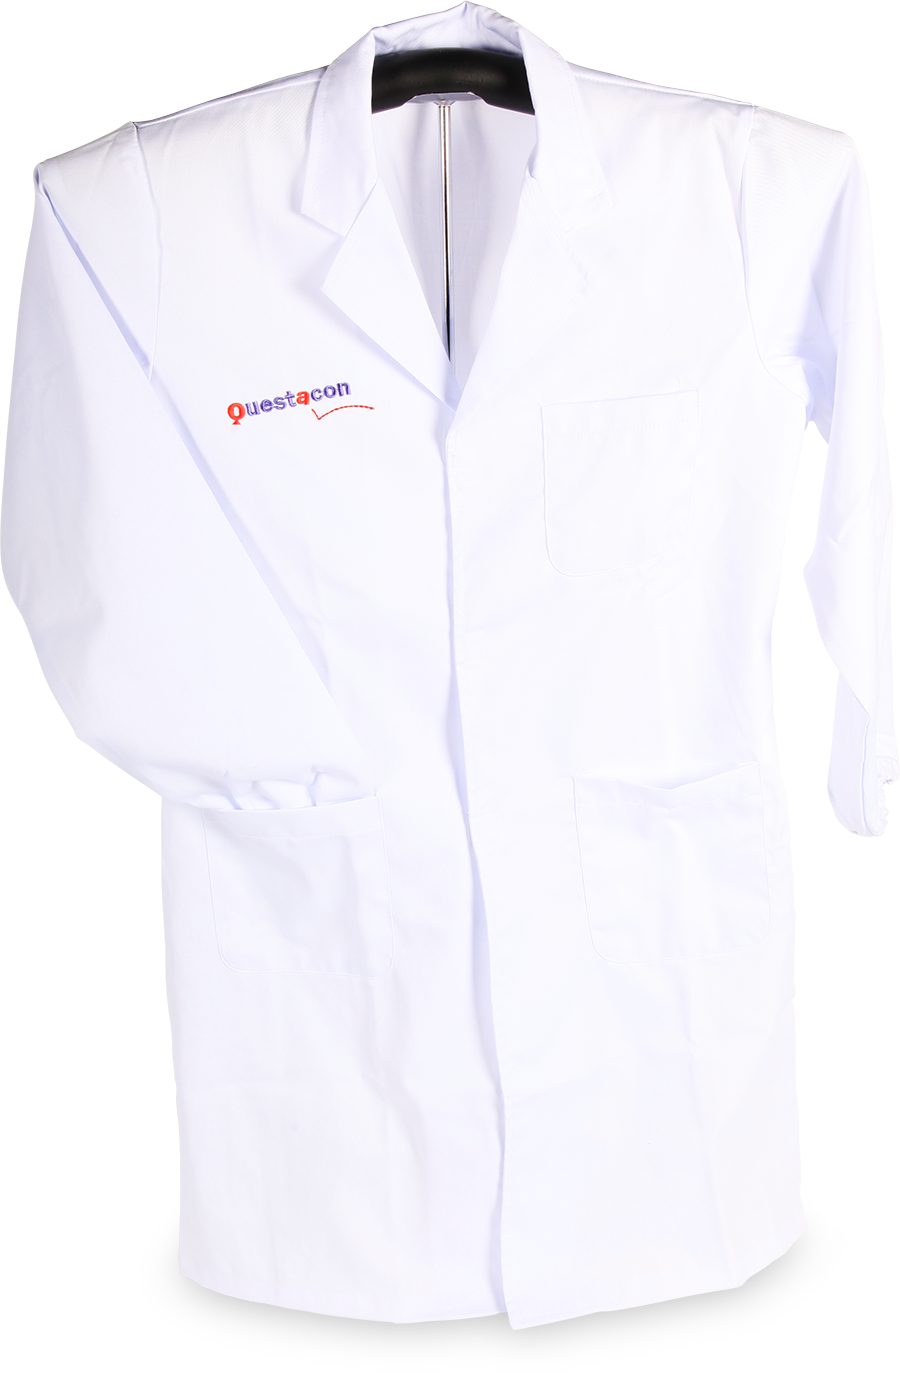 A White Lab Coat With A Black Background